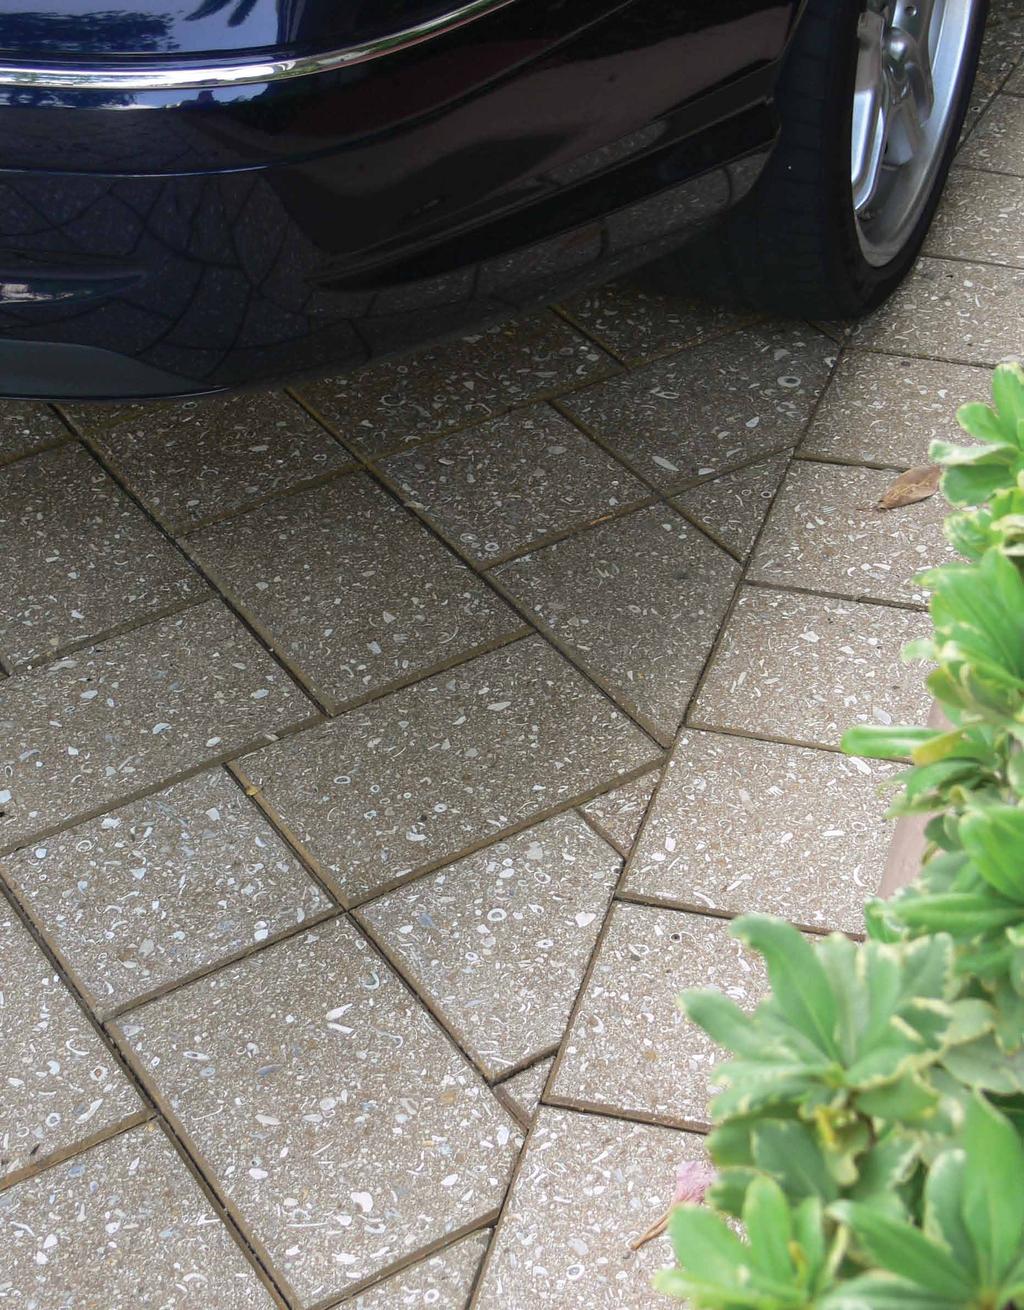 Here is why Architects, Landscape Designers and professional installers are using Artistic Roadlock pavers: The top portion of Roadlock pavers are polished to eliminate the weak thin "creamcoat"